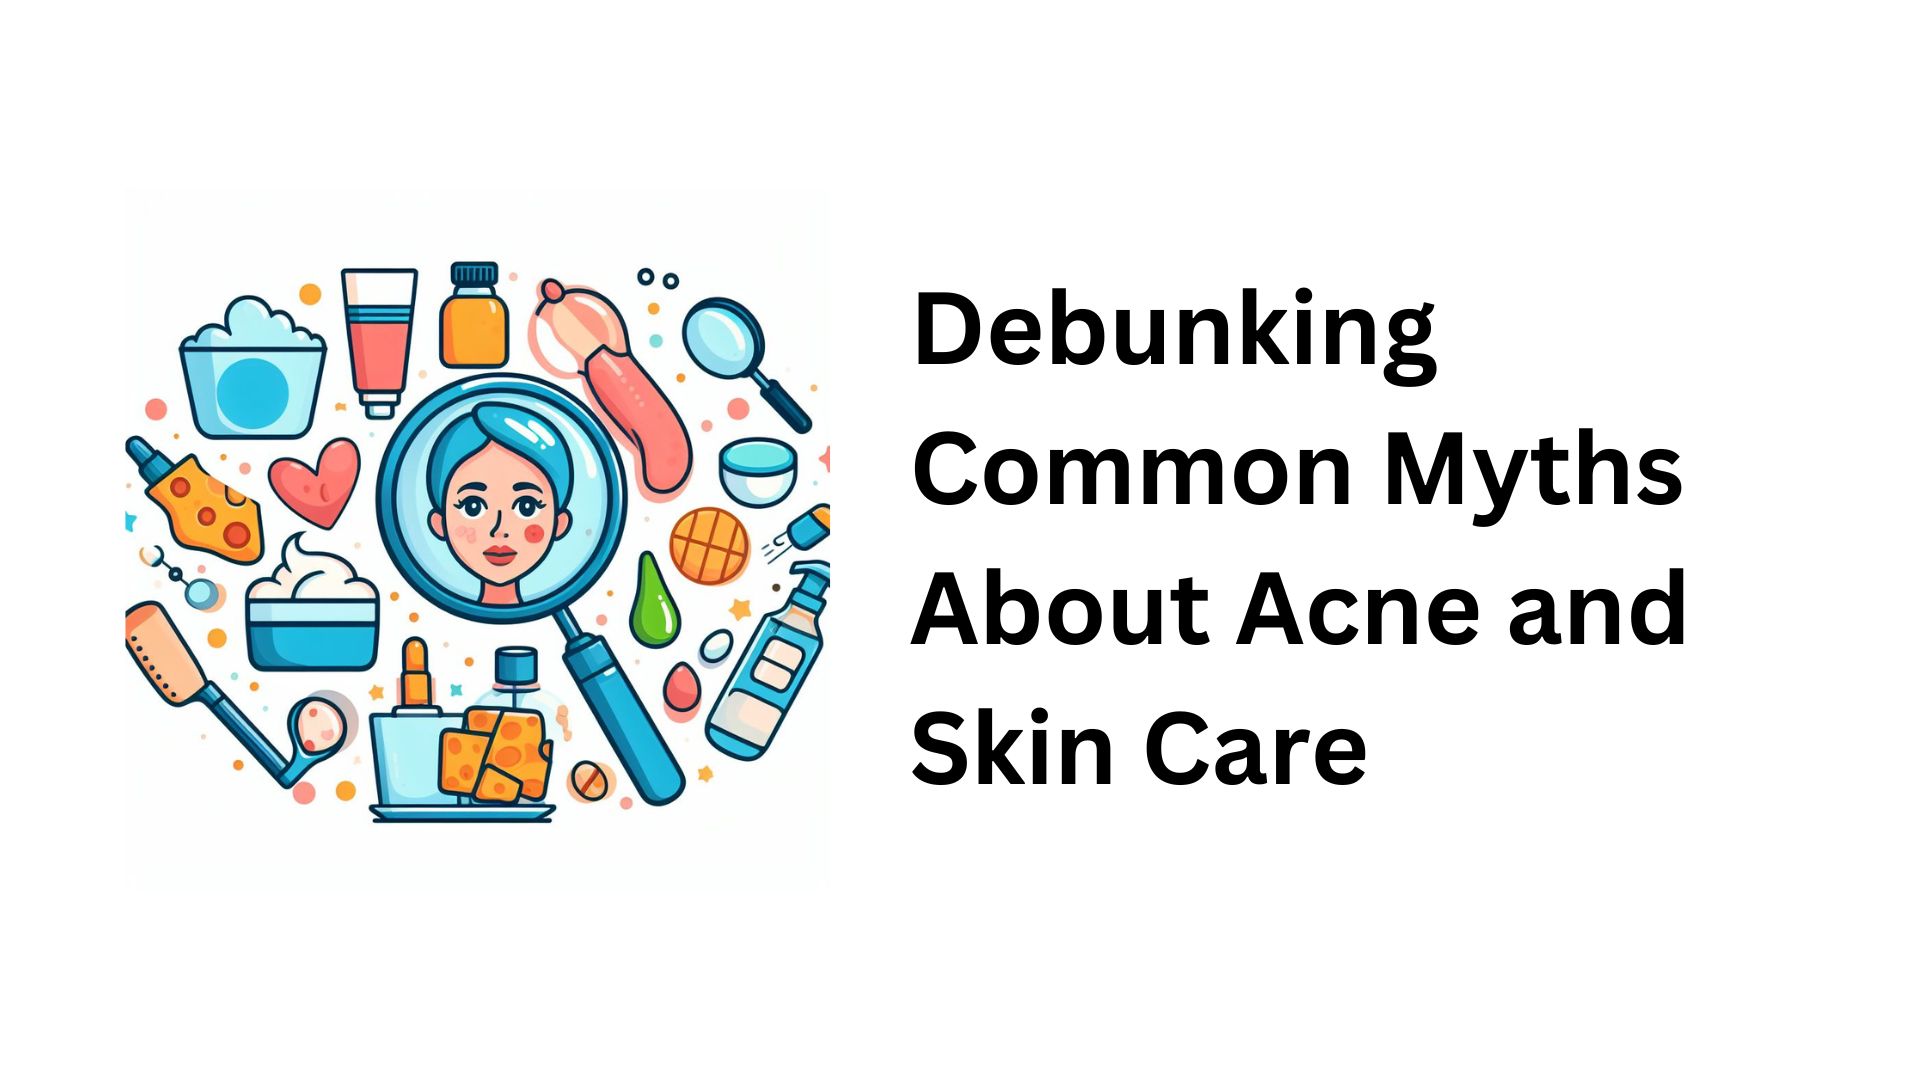 Debunking Common Myths About Acne and Skin Care